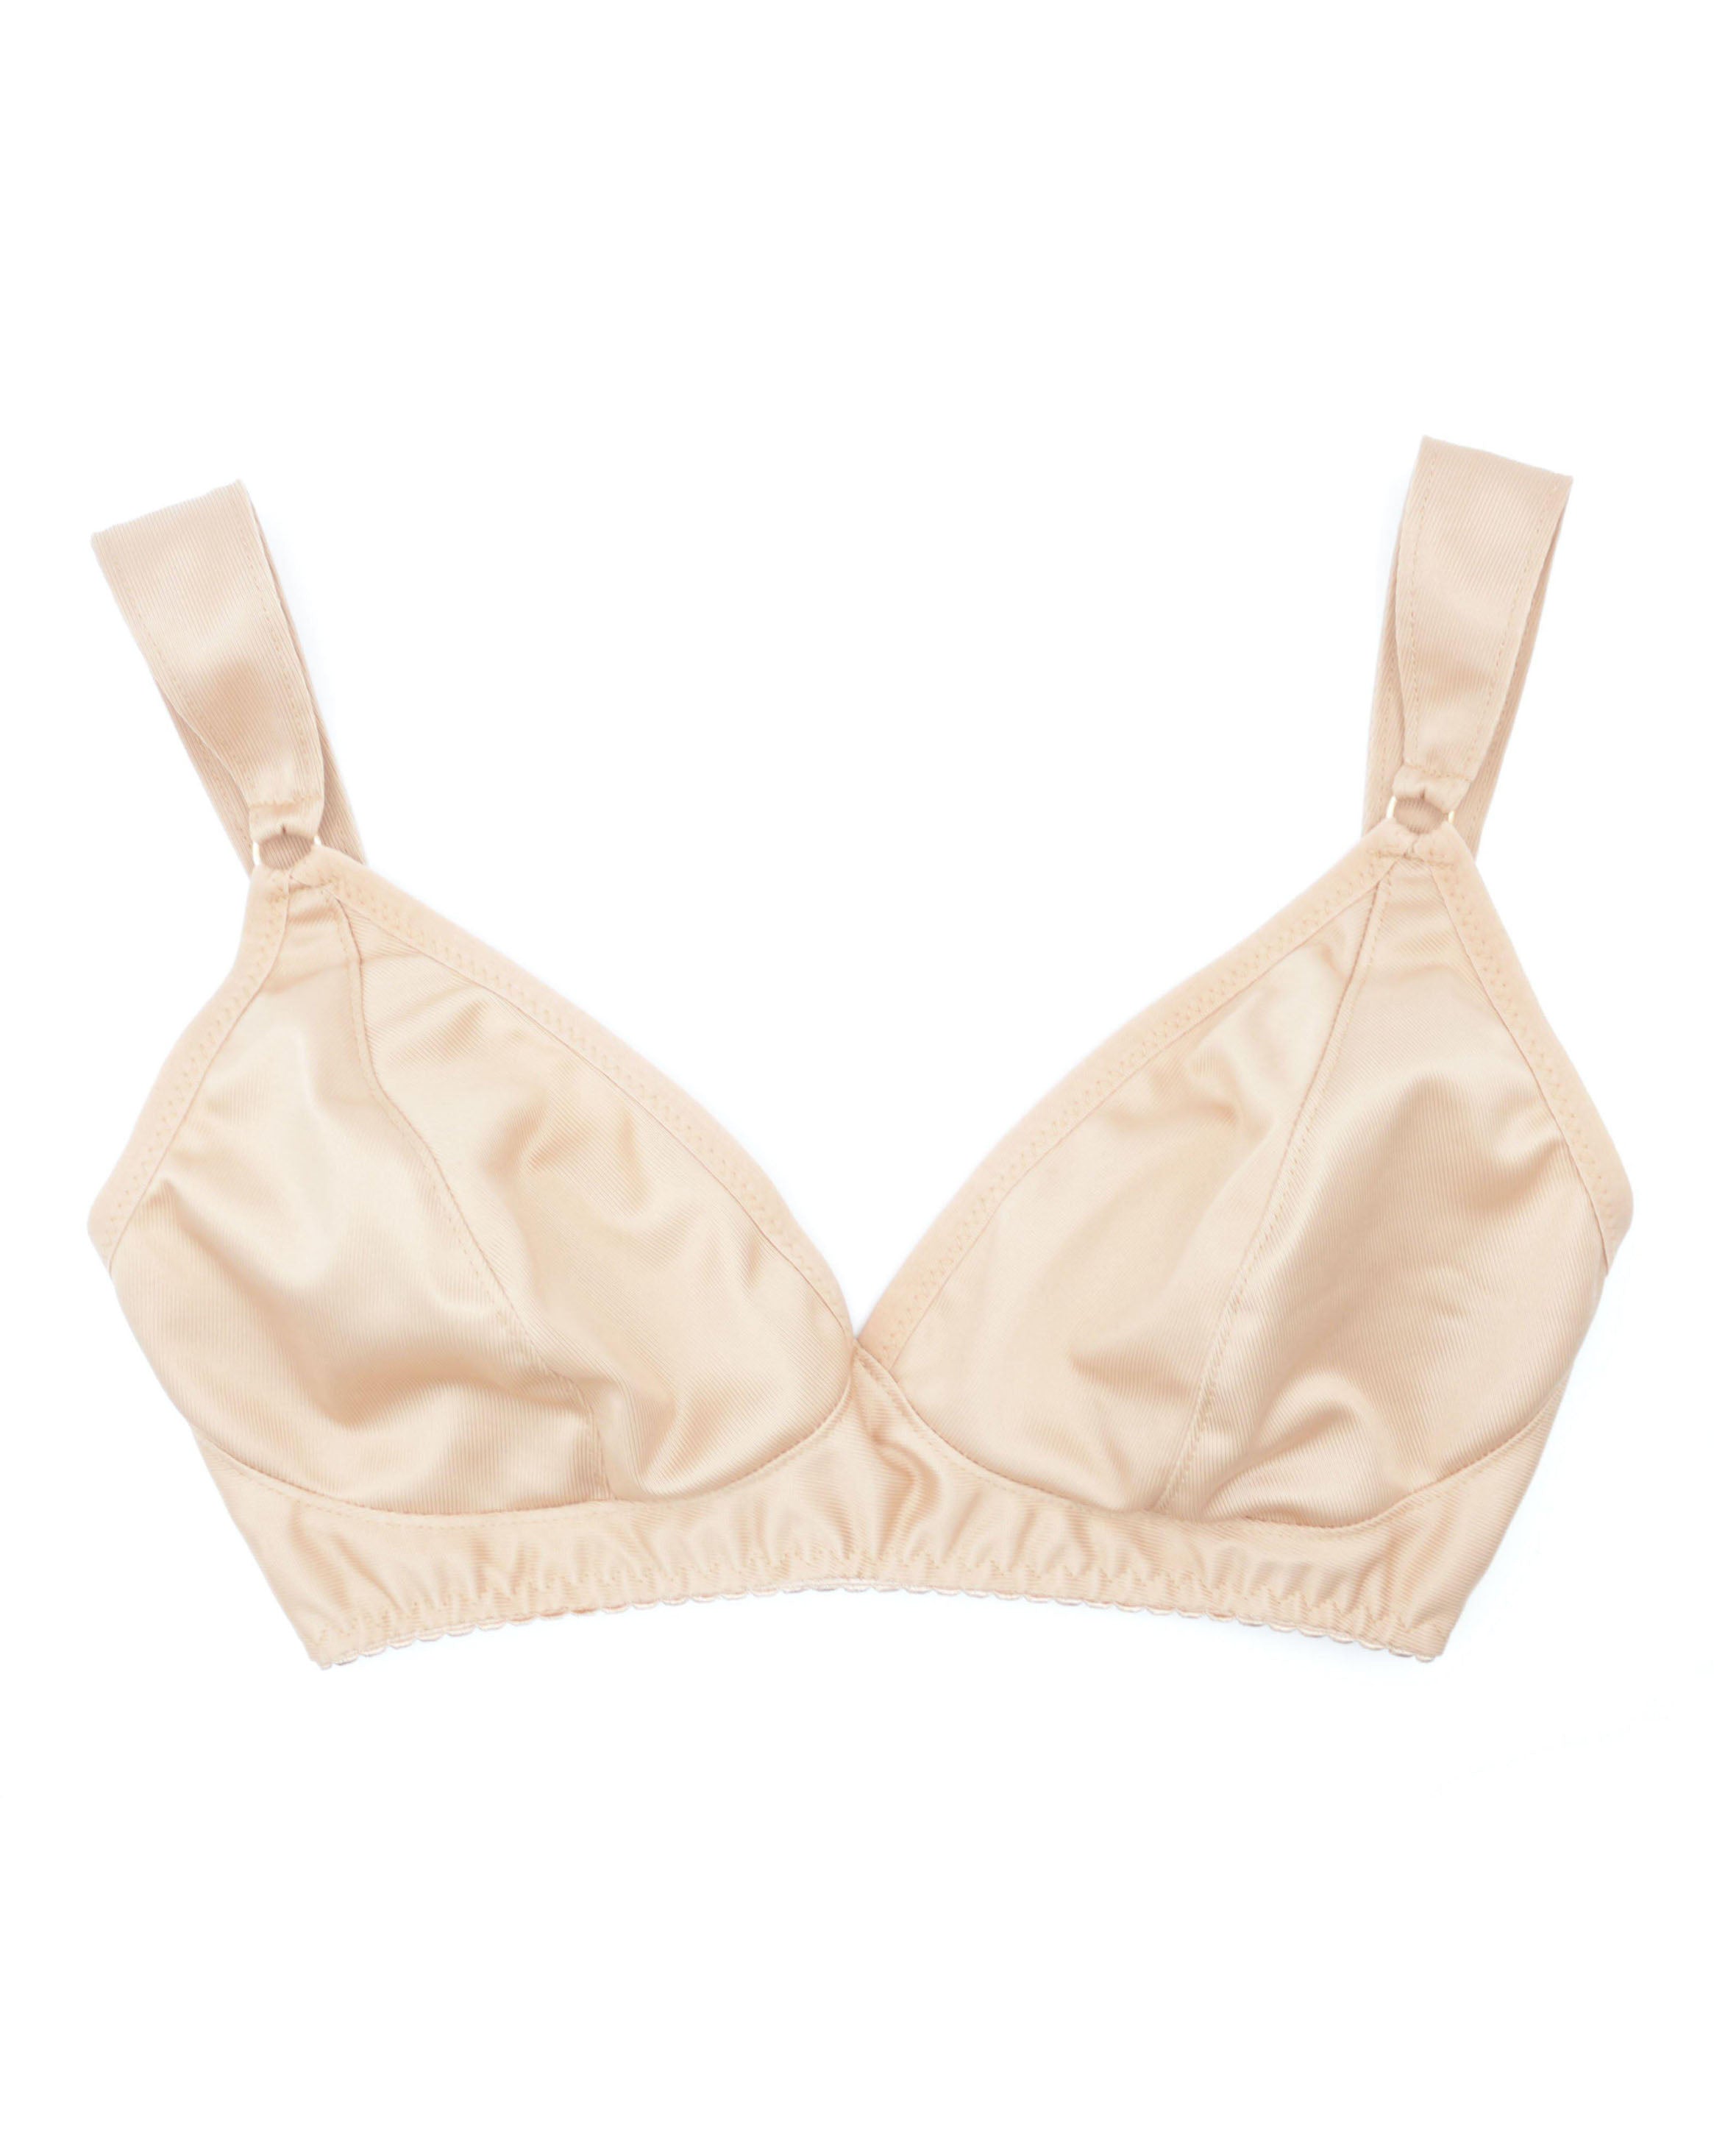 Front view of a custom made wireless bra in minimal solid beige color/colour made to order by Rubies Bras.